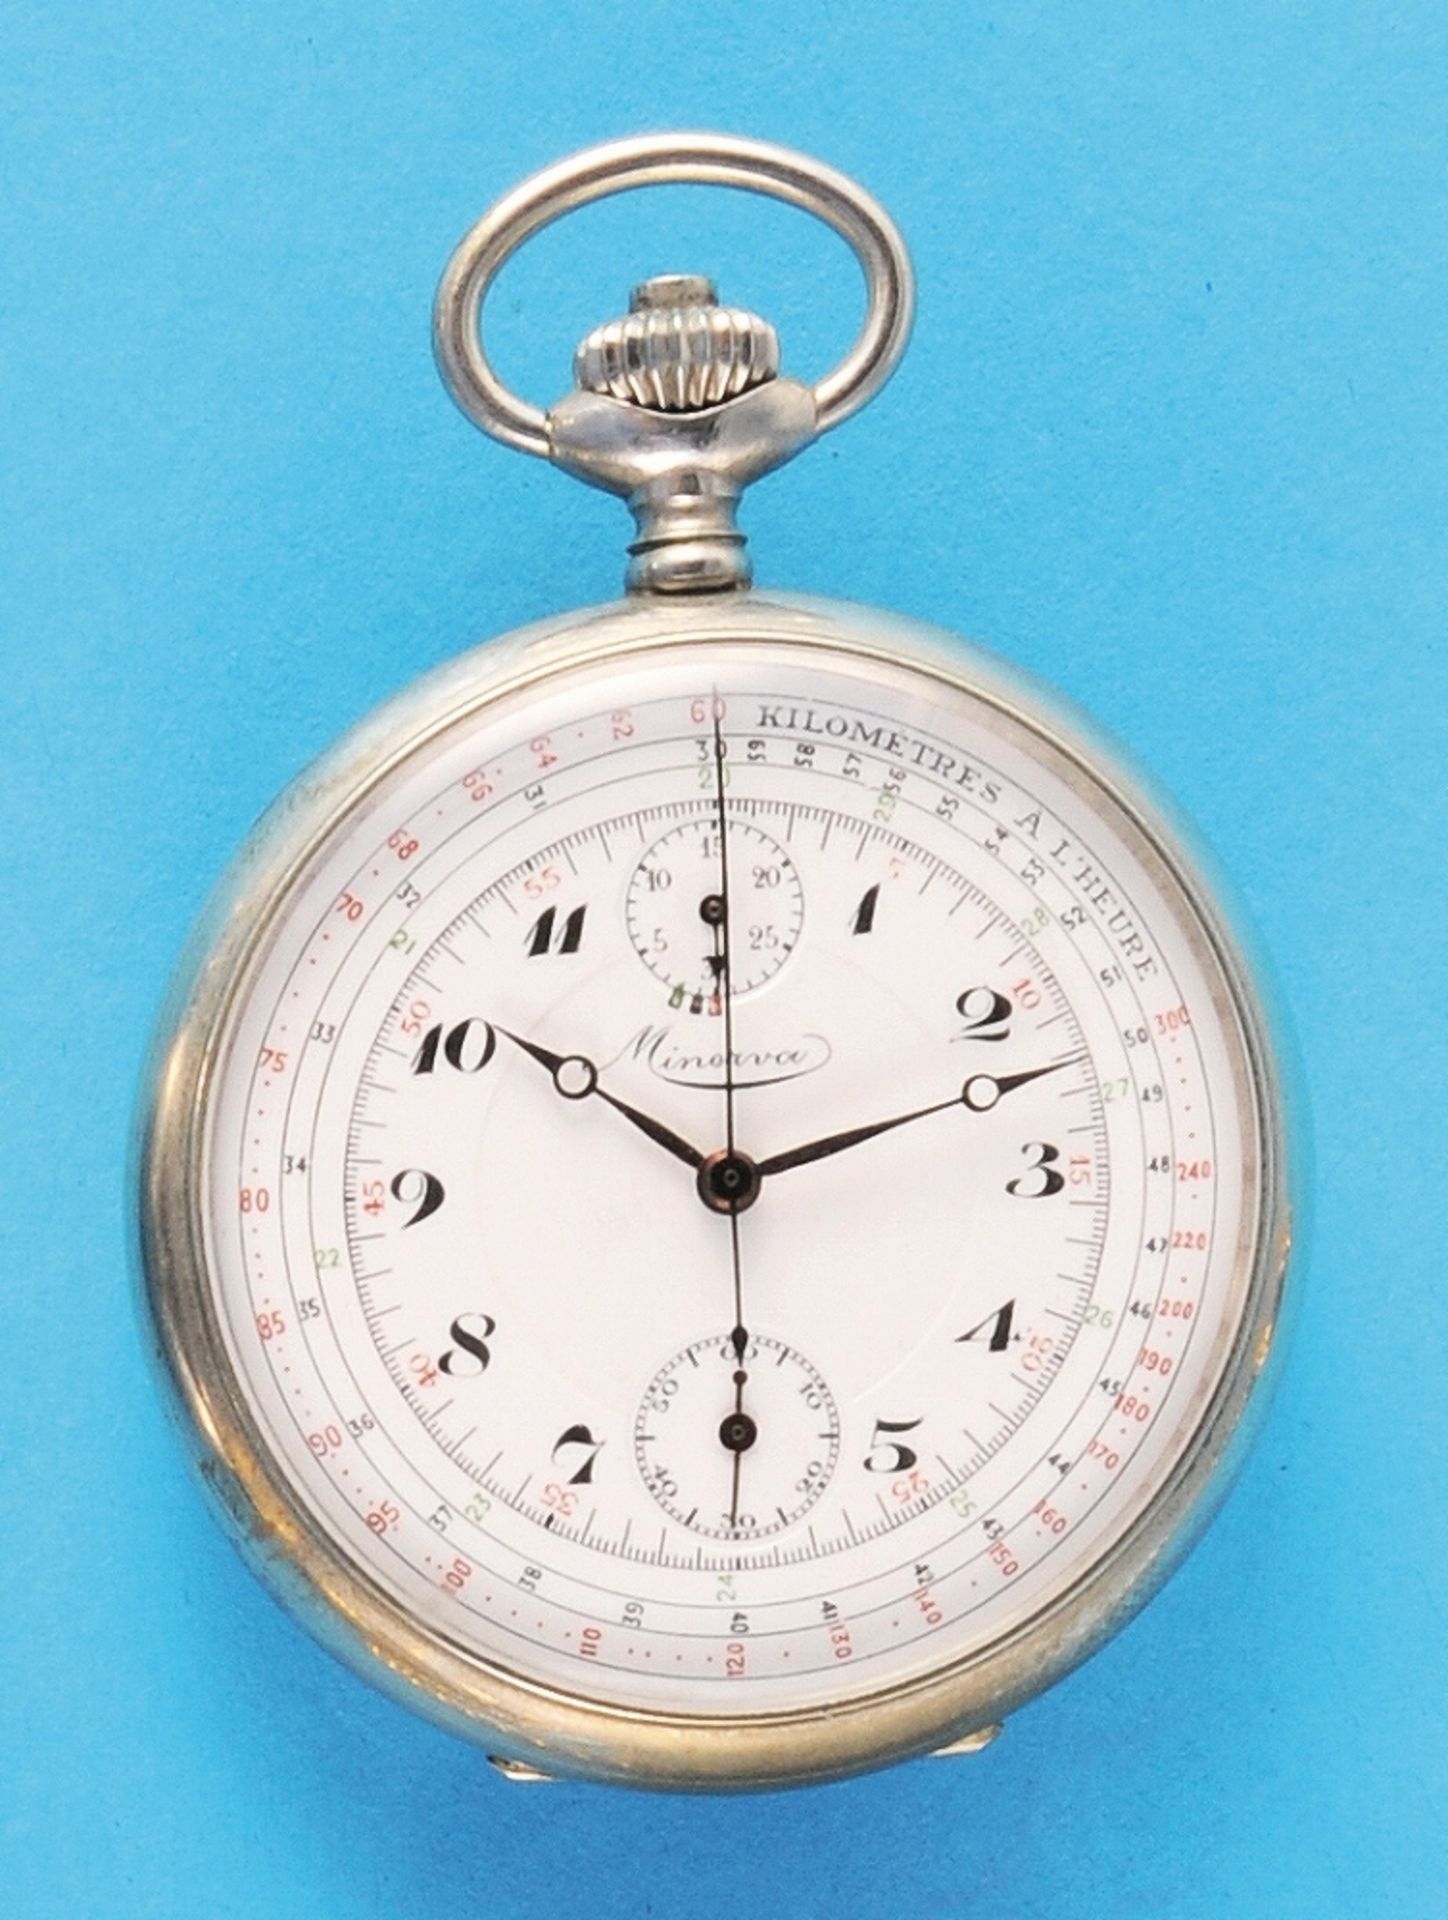 Nickel pocket watch with chronograph 30-minute counter, Minerva, smooth case, - Image 2 of 2